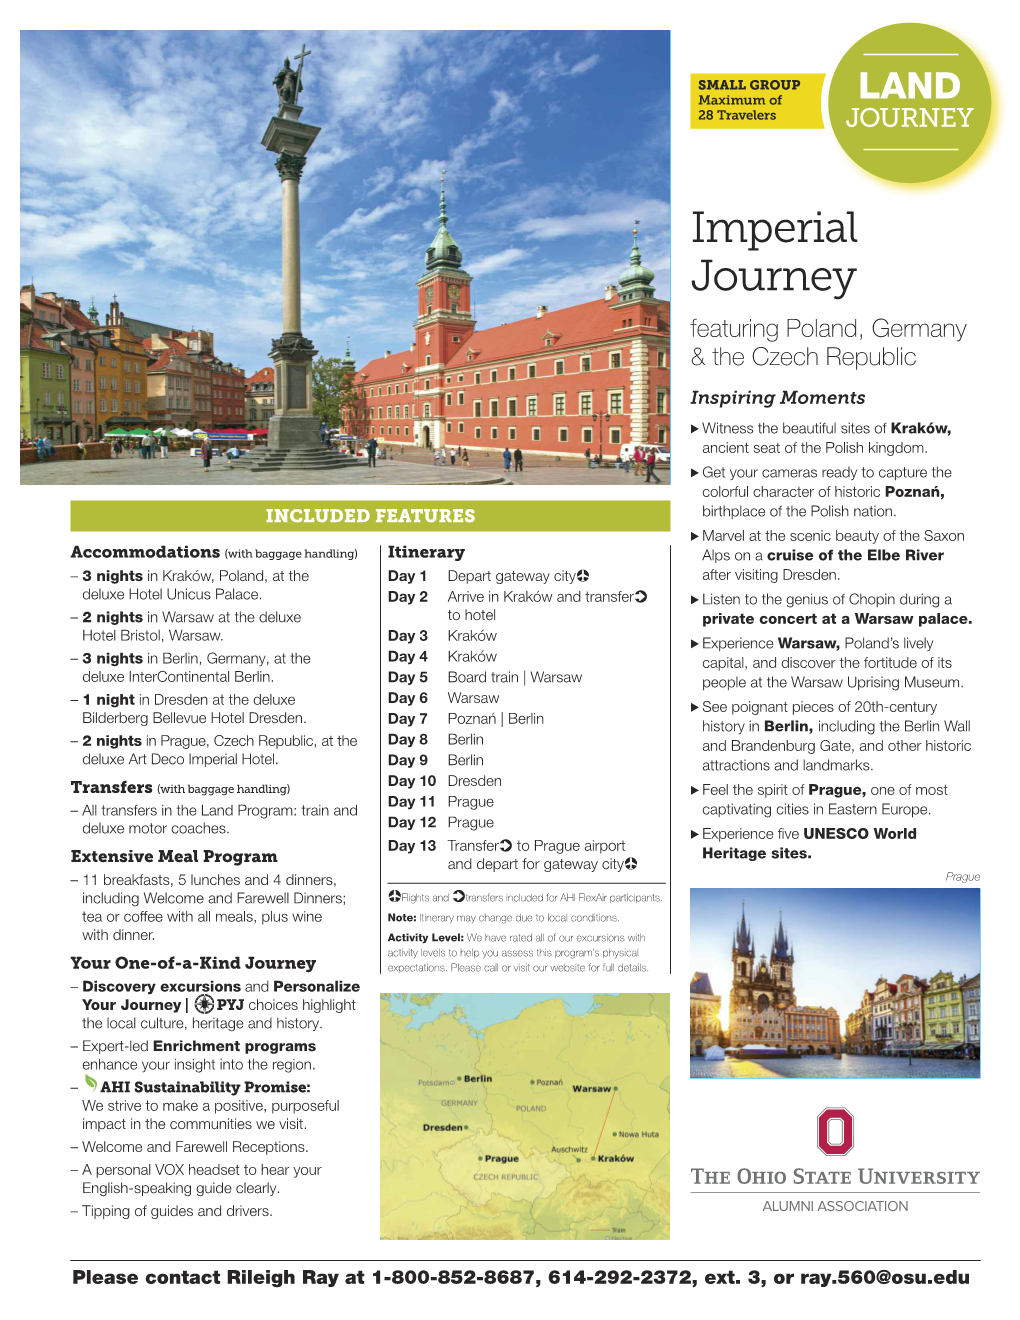 Imperial Journey Featuring Poland, Germany & the Czech Republic